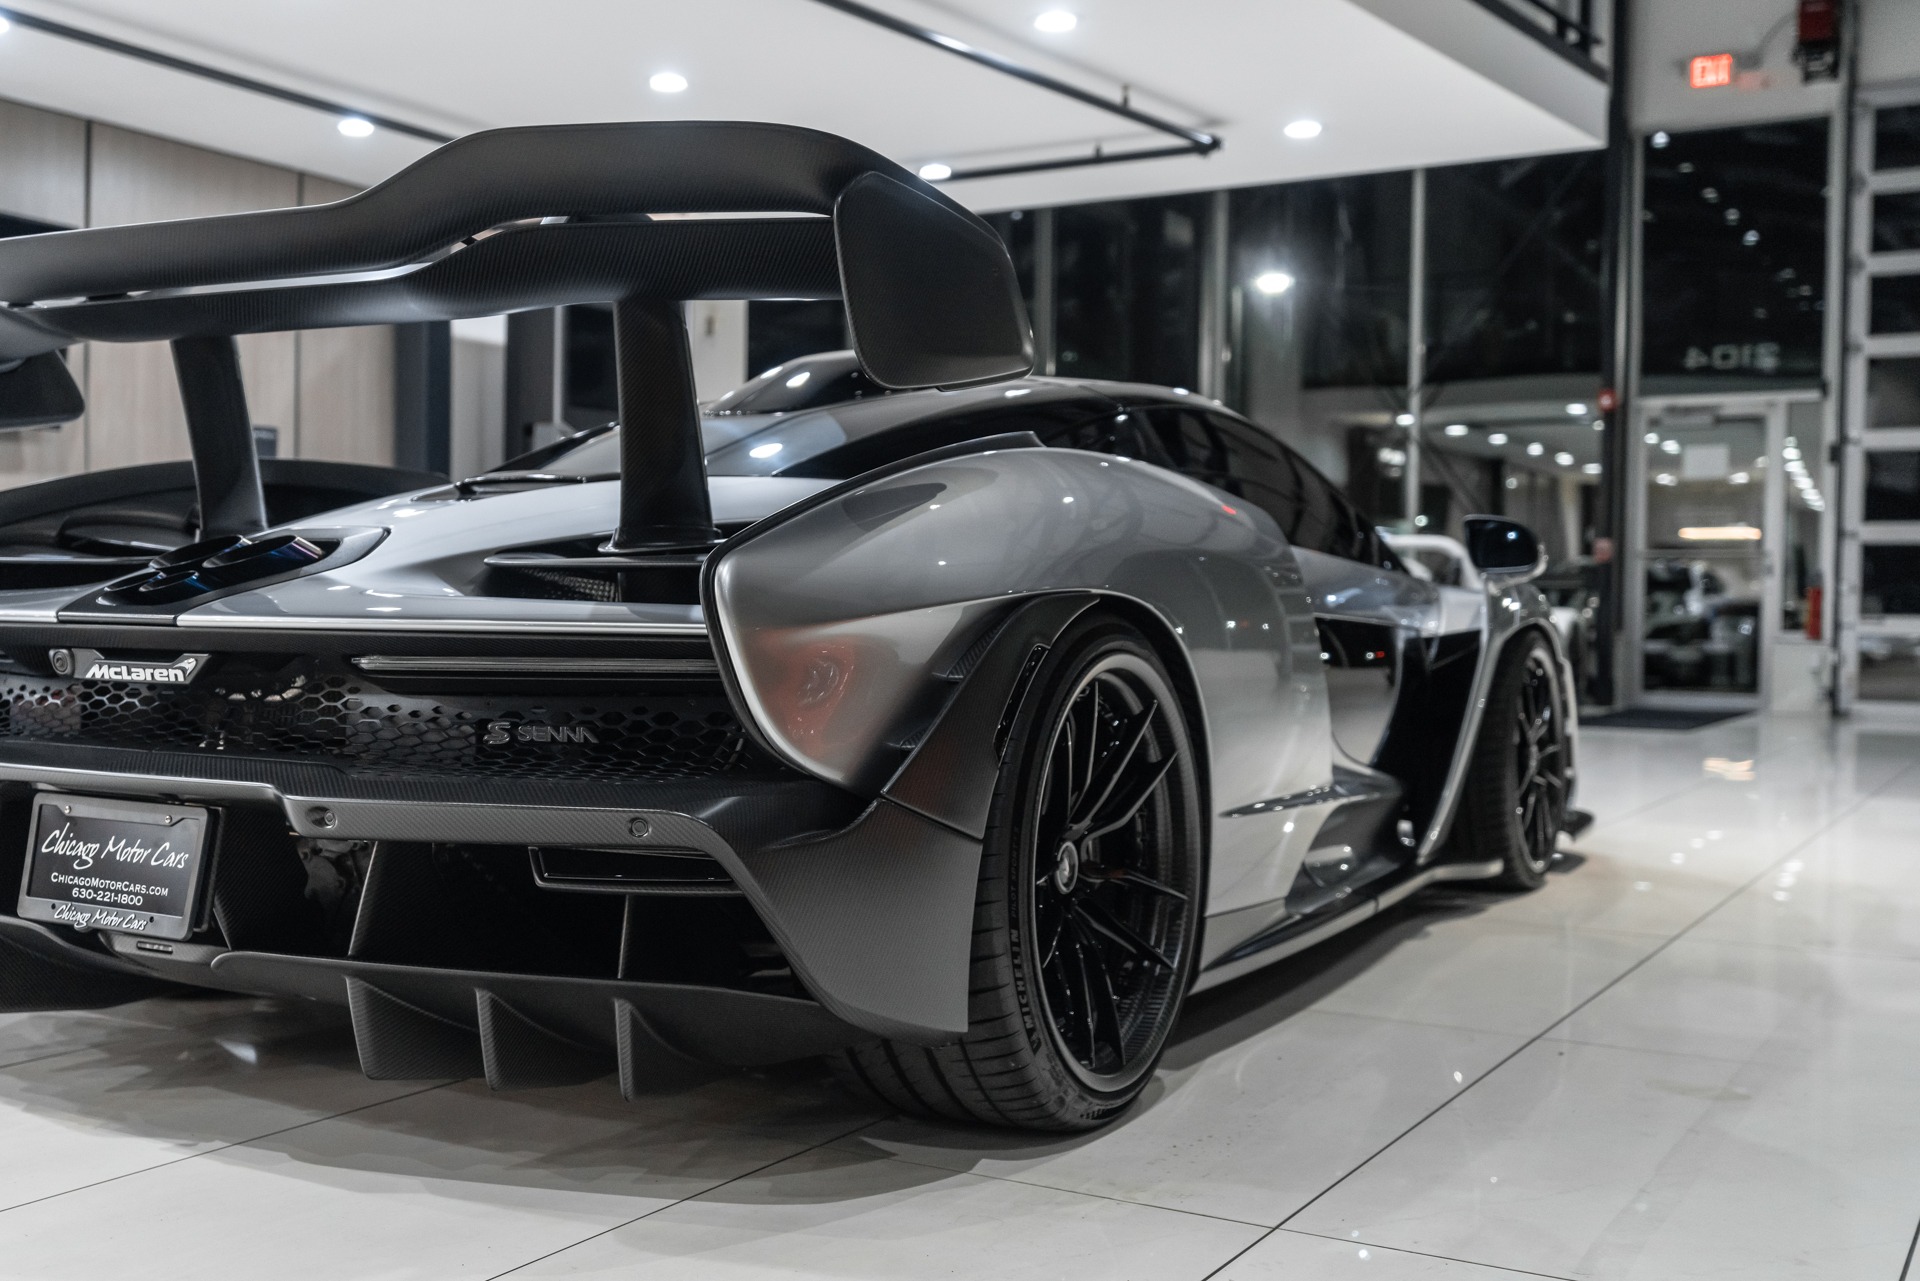 Used-2019-McLaren-Senna-Coupe-Liquid-Silver-Bespoke-Interior-TONS-of-Carbon-100K-in-Options